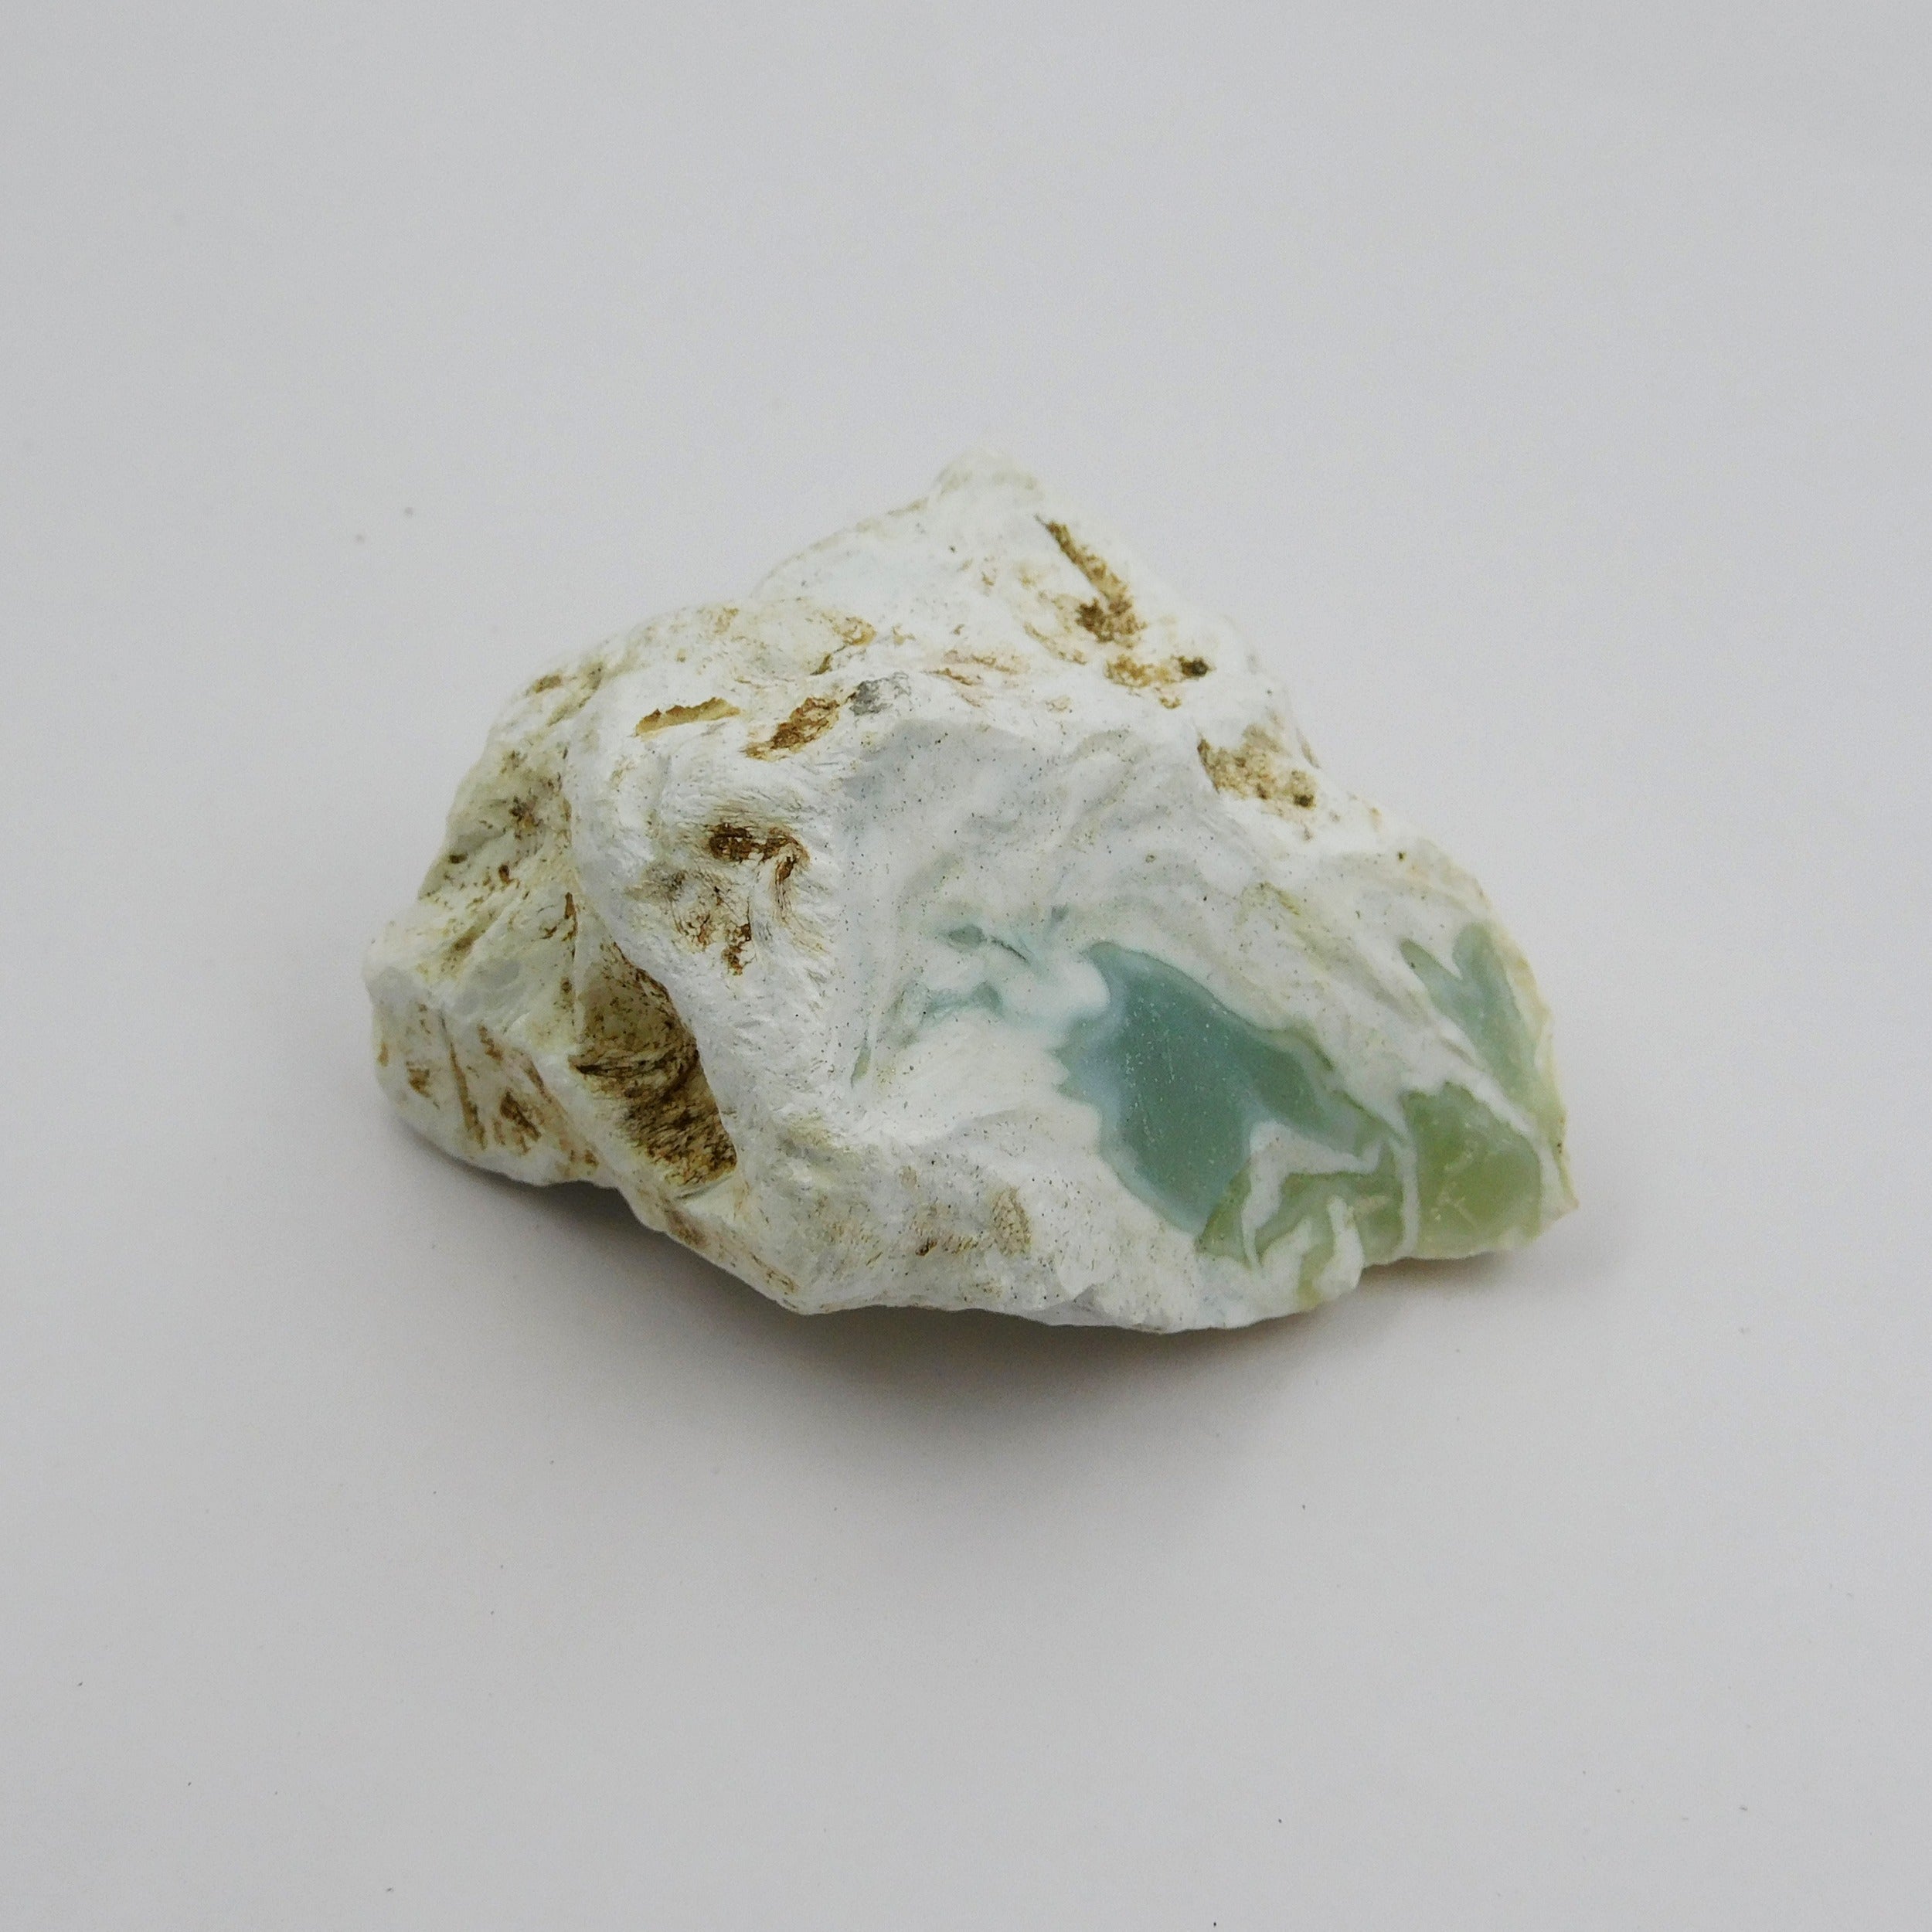 222.40 Carat Huge Size Natural White Color Opal Rough Certified Loose Gemstone Rough Opal Gemstone Rough, Healing Chakra Balance, Designer AAA Quality White Opal Rough, Pendant Jewelry Making Raw Opal Crystal Minerals